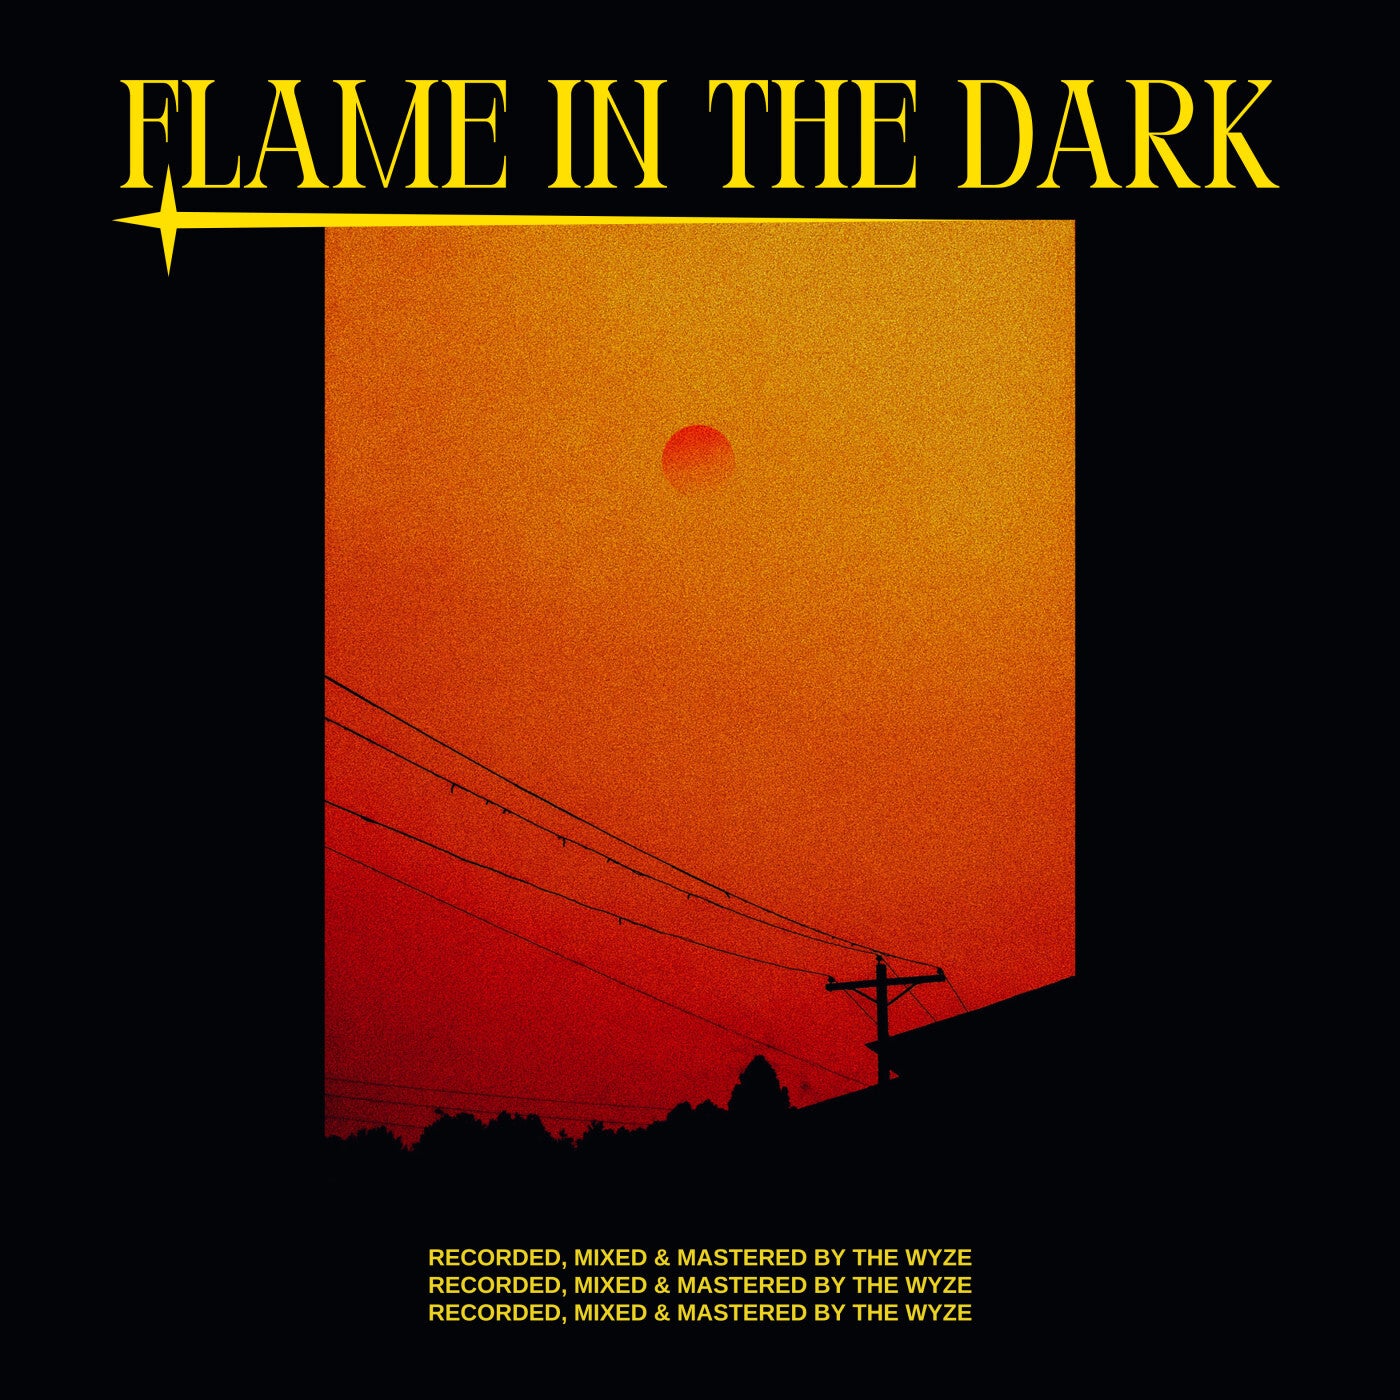 FLAME IN THE DARK